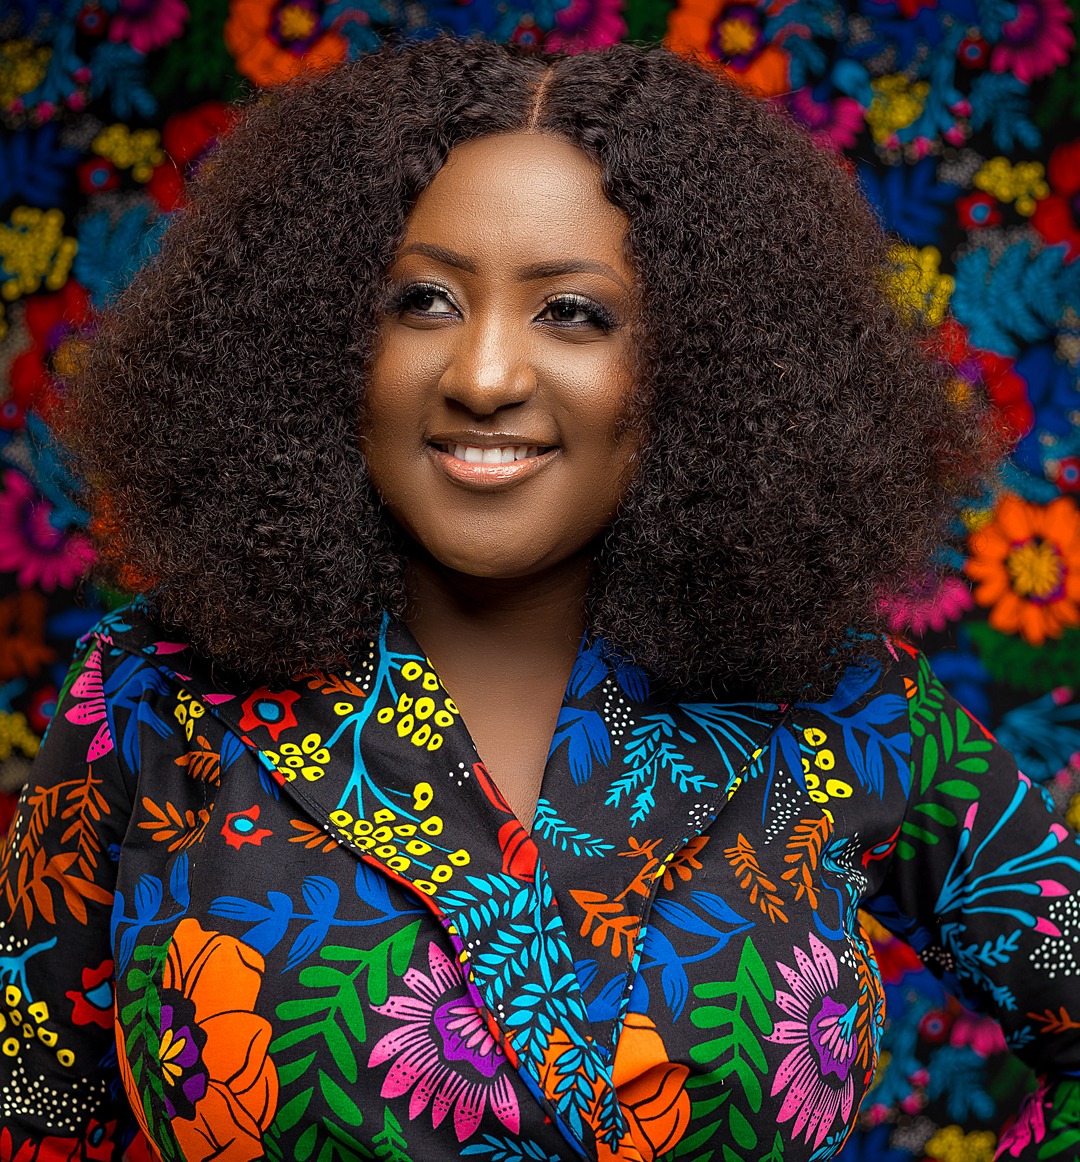 Lordina the Soprano poses with a flowery blouse that matches the background and lush hair